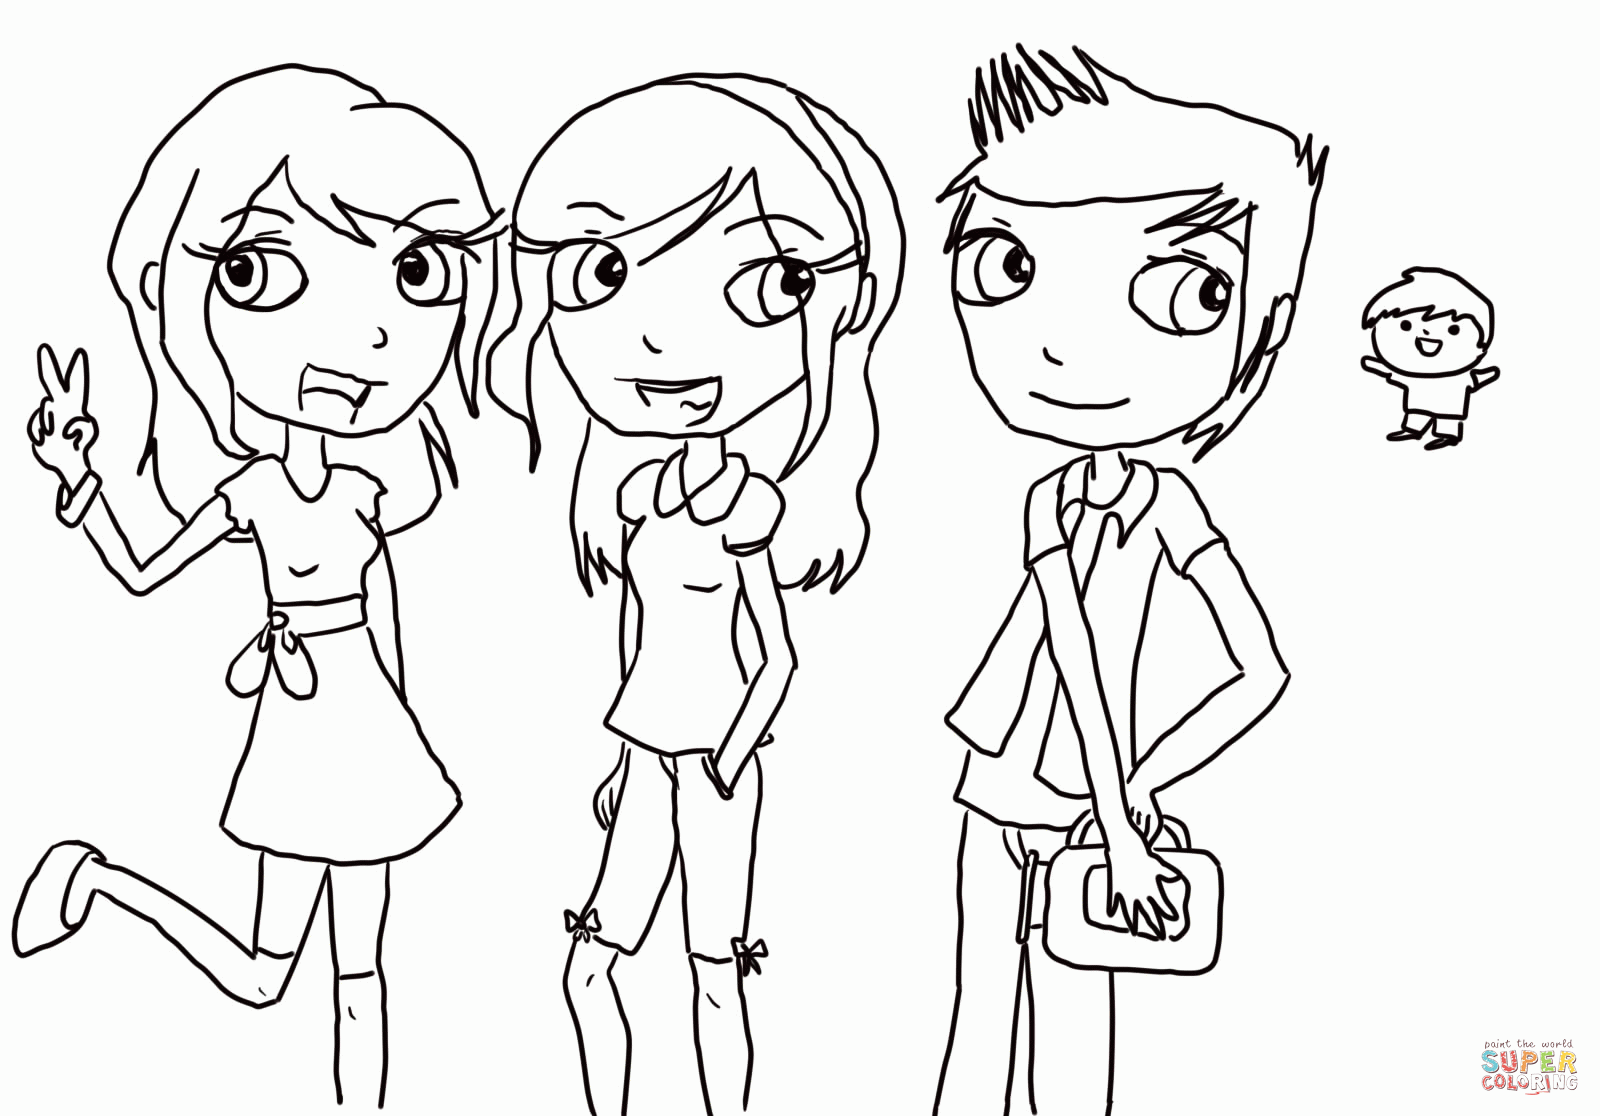 Icarly With Victorious Coloring Pages - High Quality Coloring Pages